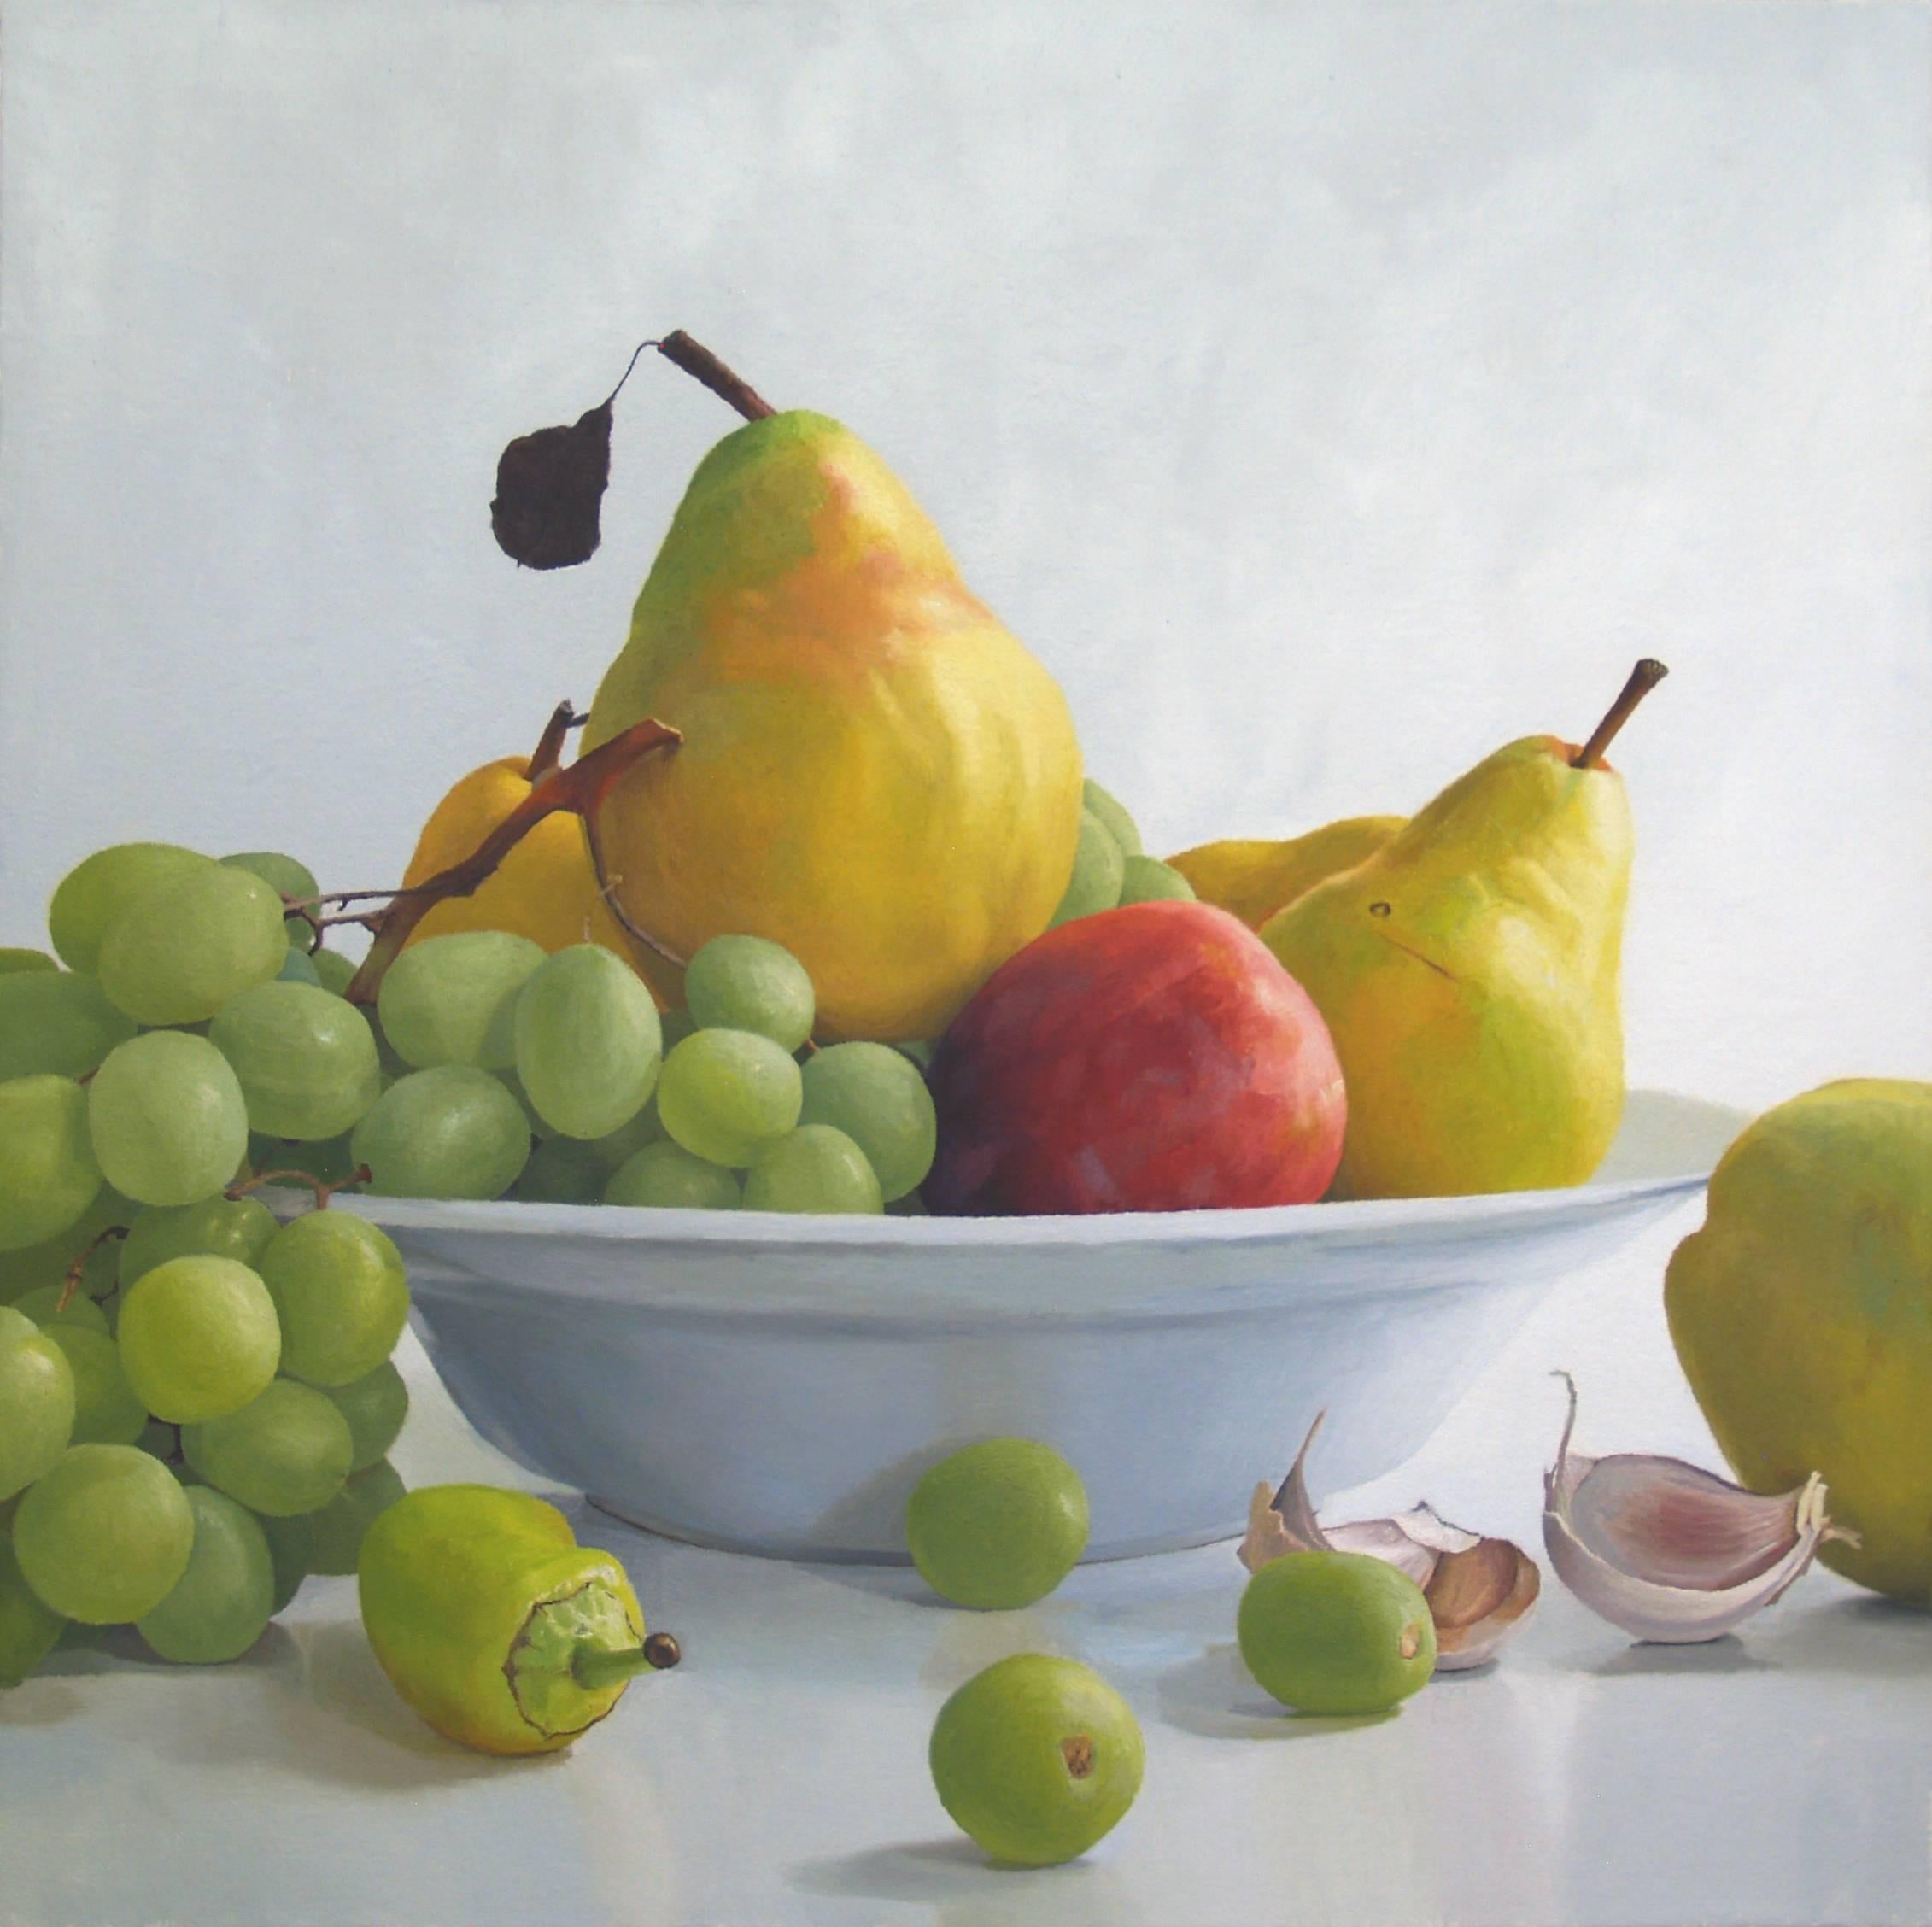 Grapes & Pears with Pluot - Painting by Randall W. L. Mooers